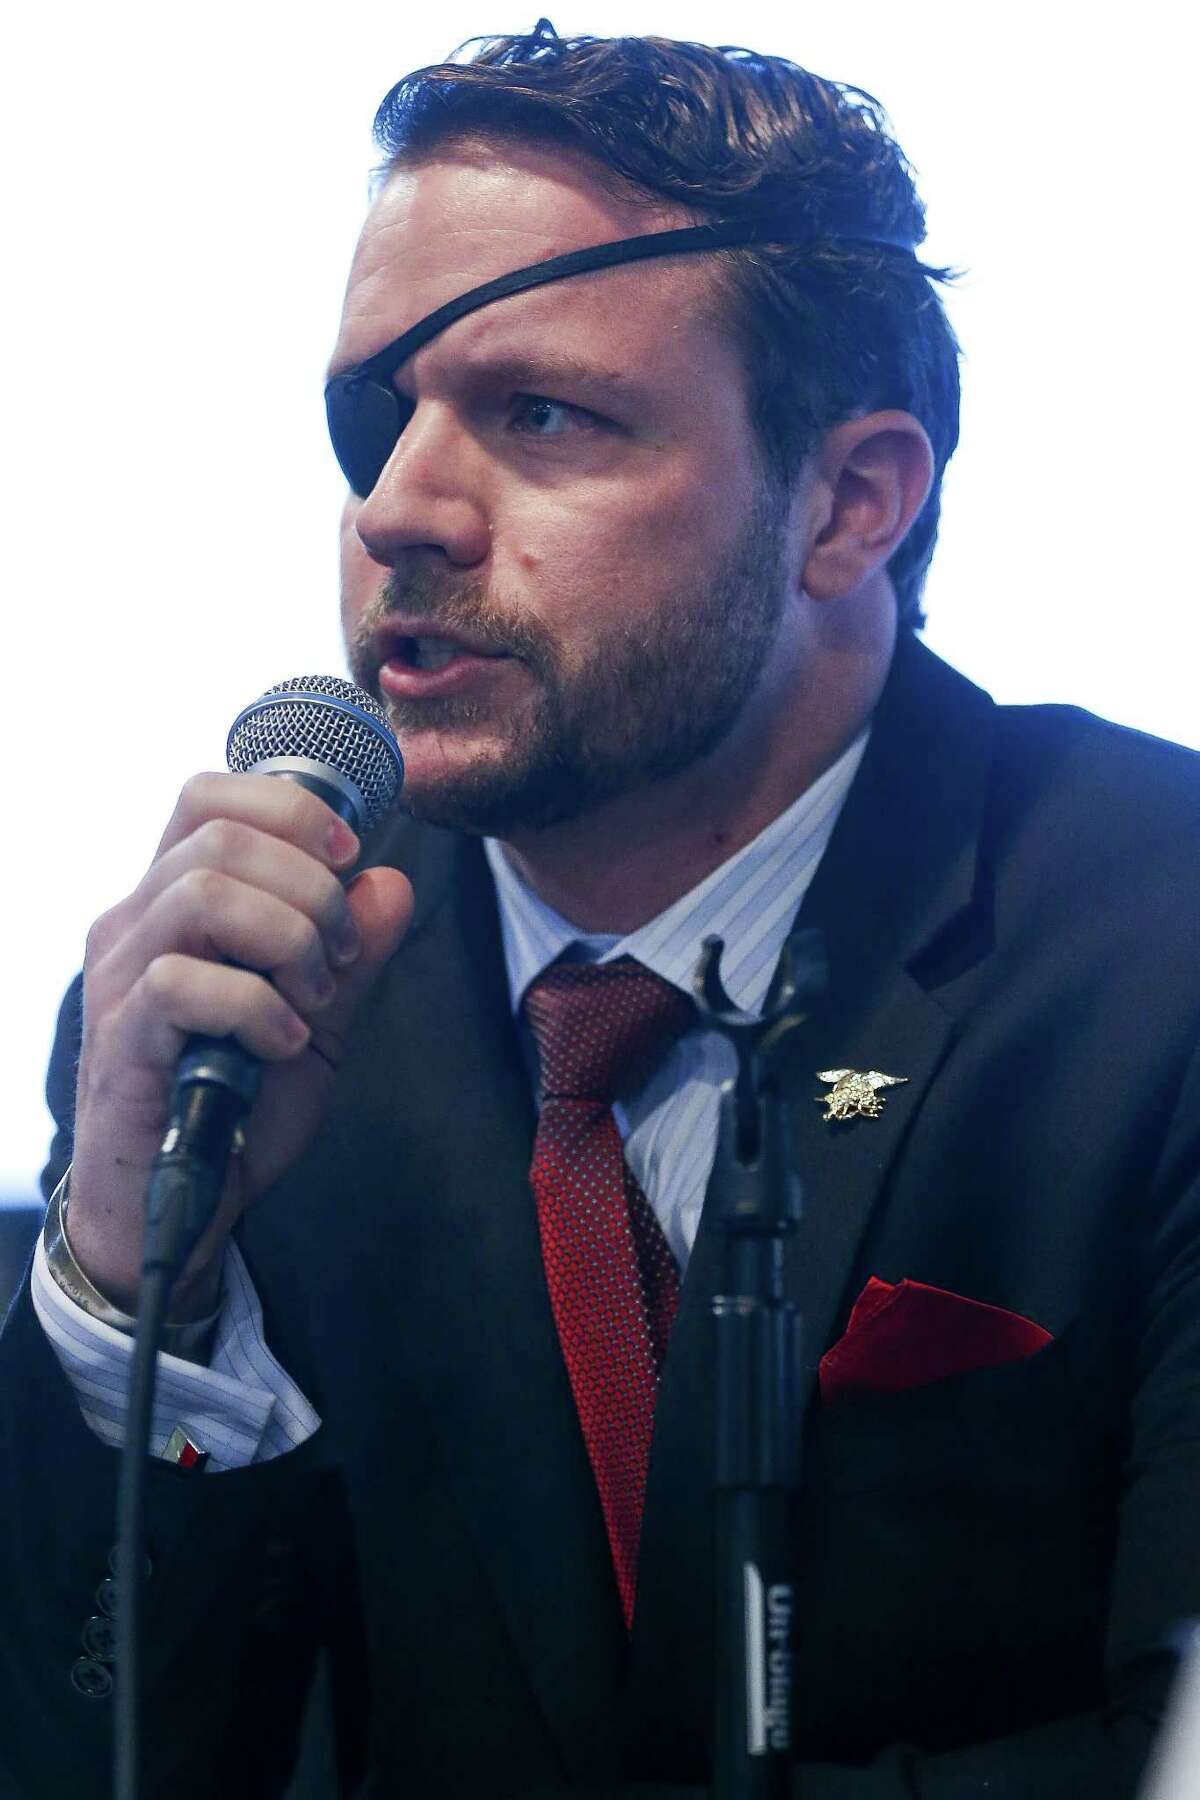 United States Congressional District 2 candidate Dan Crenshaw speaks during the Houston Congressional Candidate Forum at Houston's First Baptist Church Thursday, Jan. 18, 2018 in Houston. ( Michael Ciaglo / Houston Chronicle)